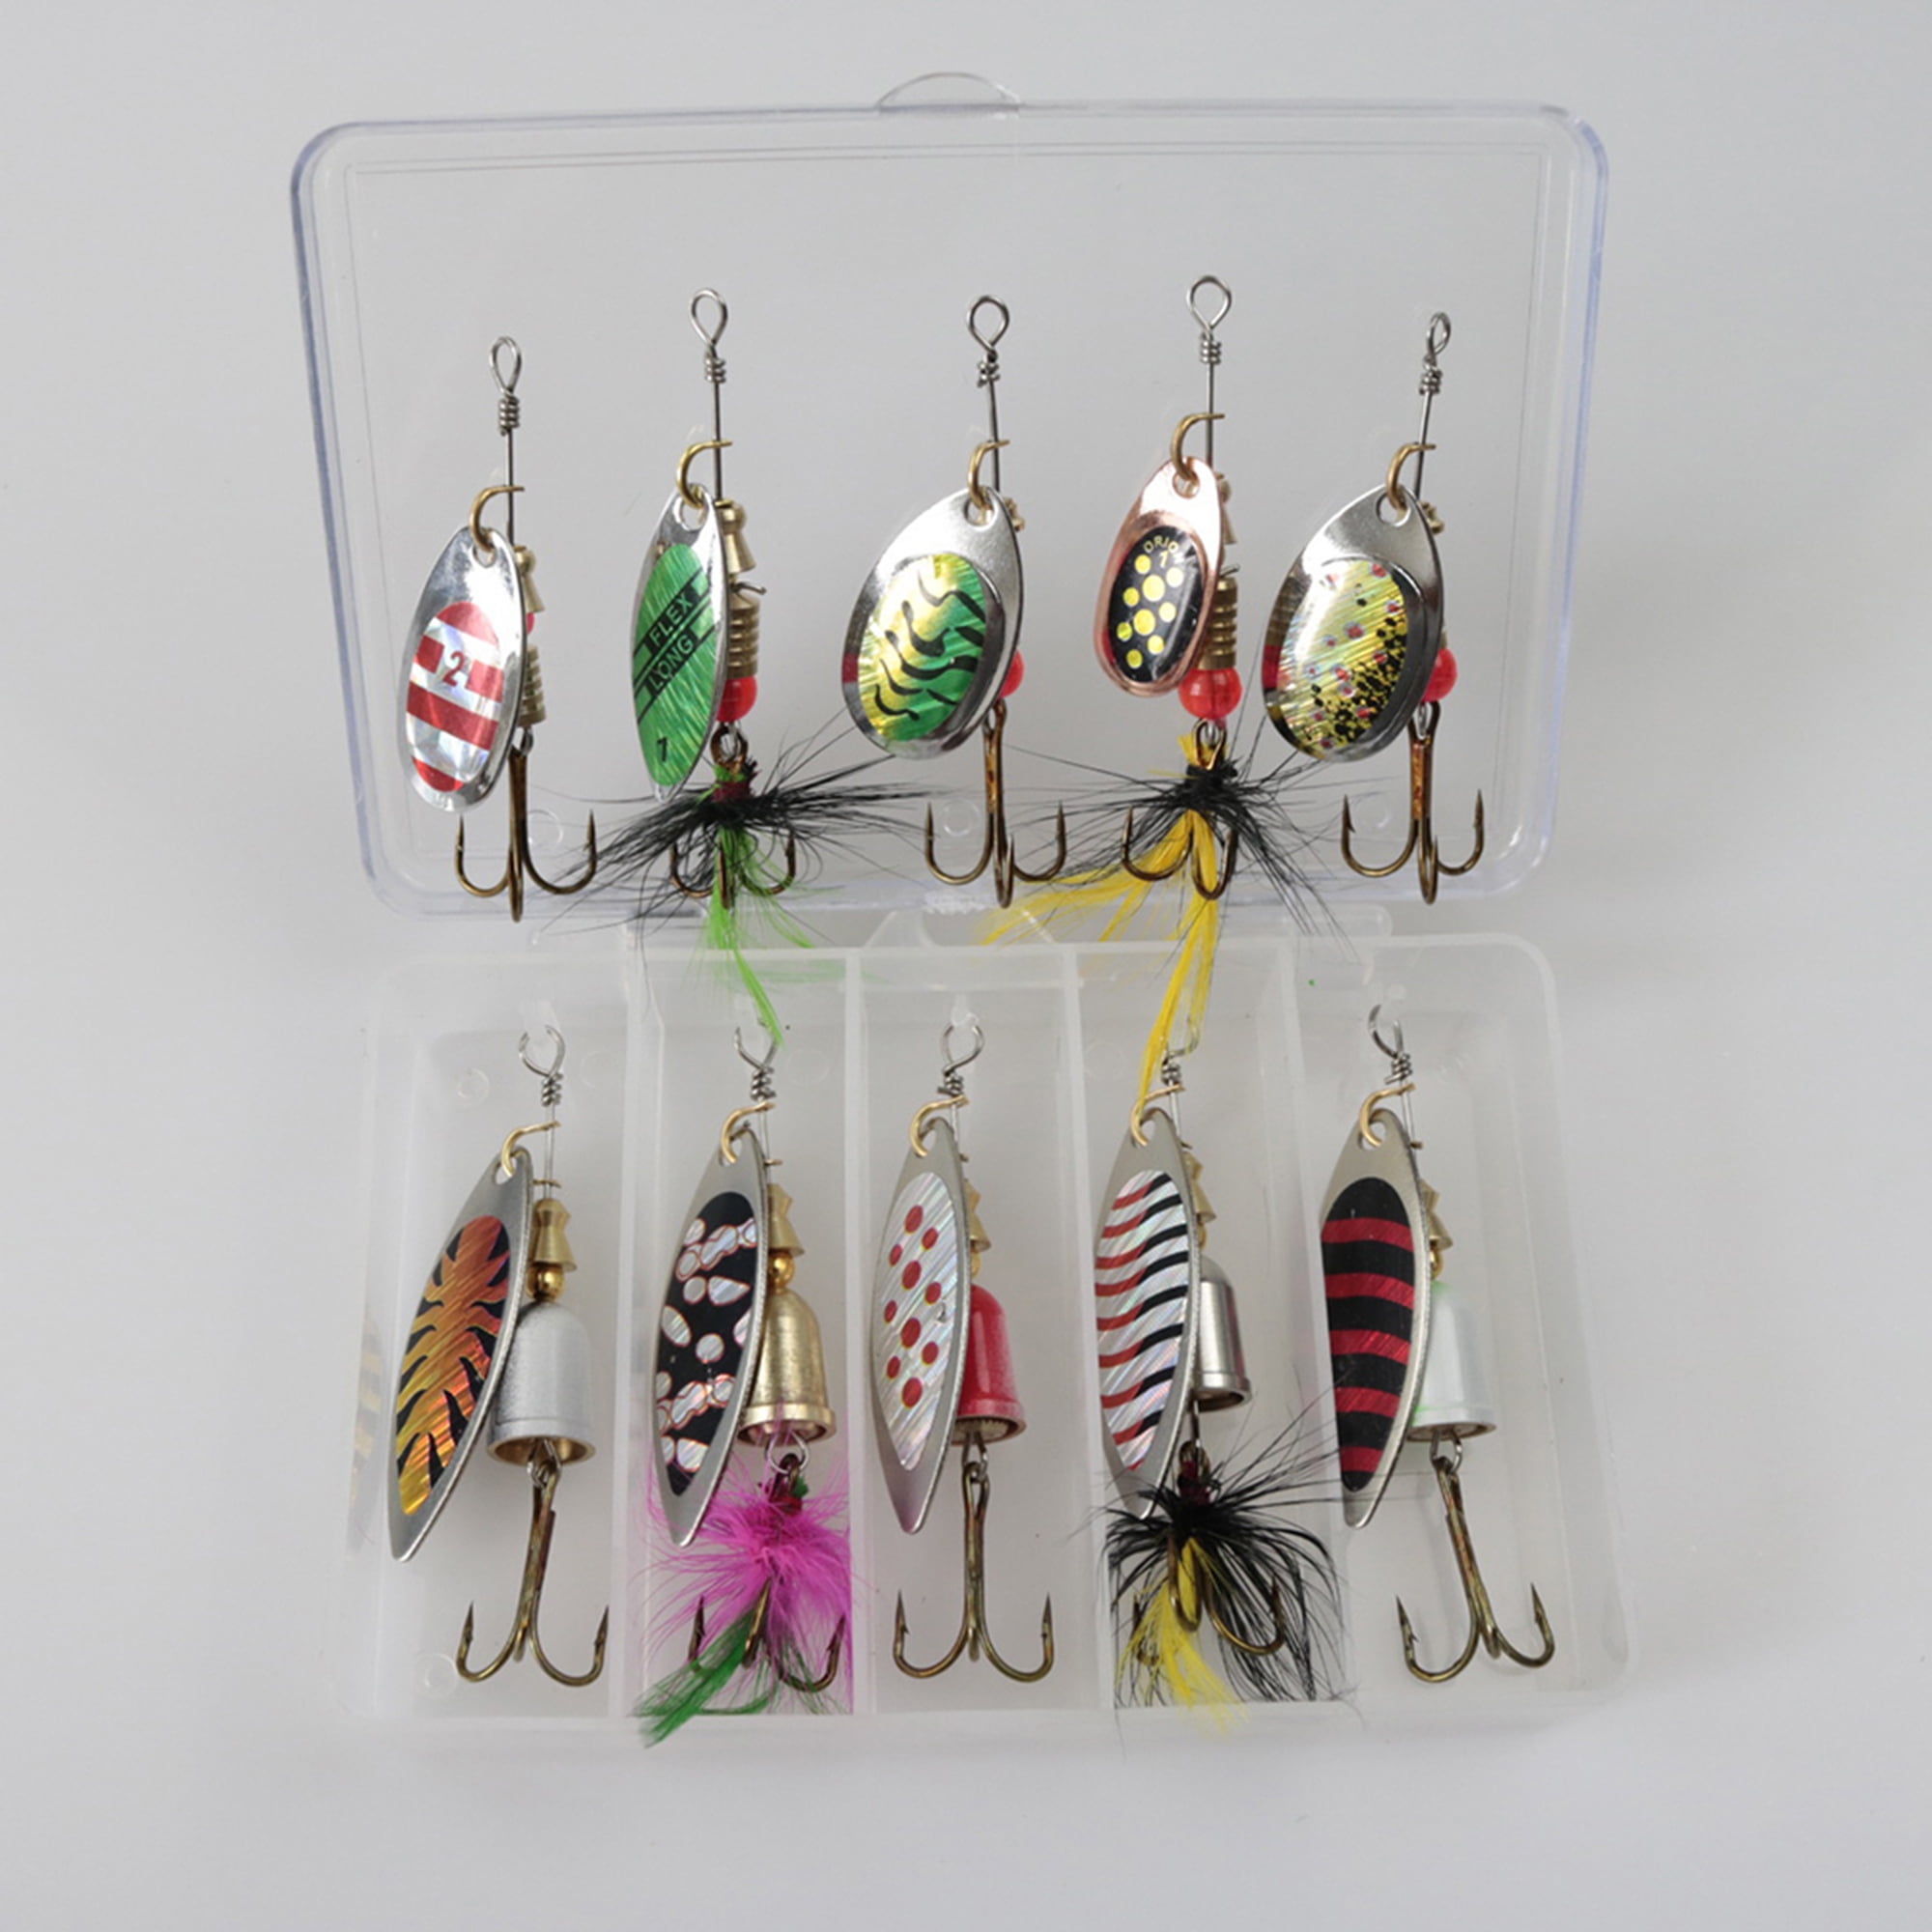  10pcs Fishing Lure Spinnerbait, Bass Trout Salmon Hard Metal  Spinner Baits Kit with 2 Tackle Boxes by Tbuymax : Sports & Outdoors